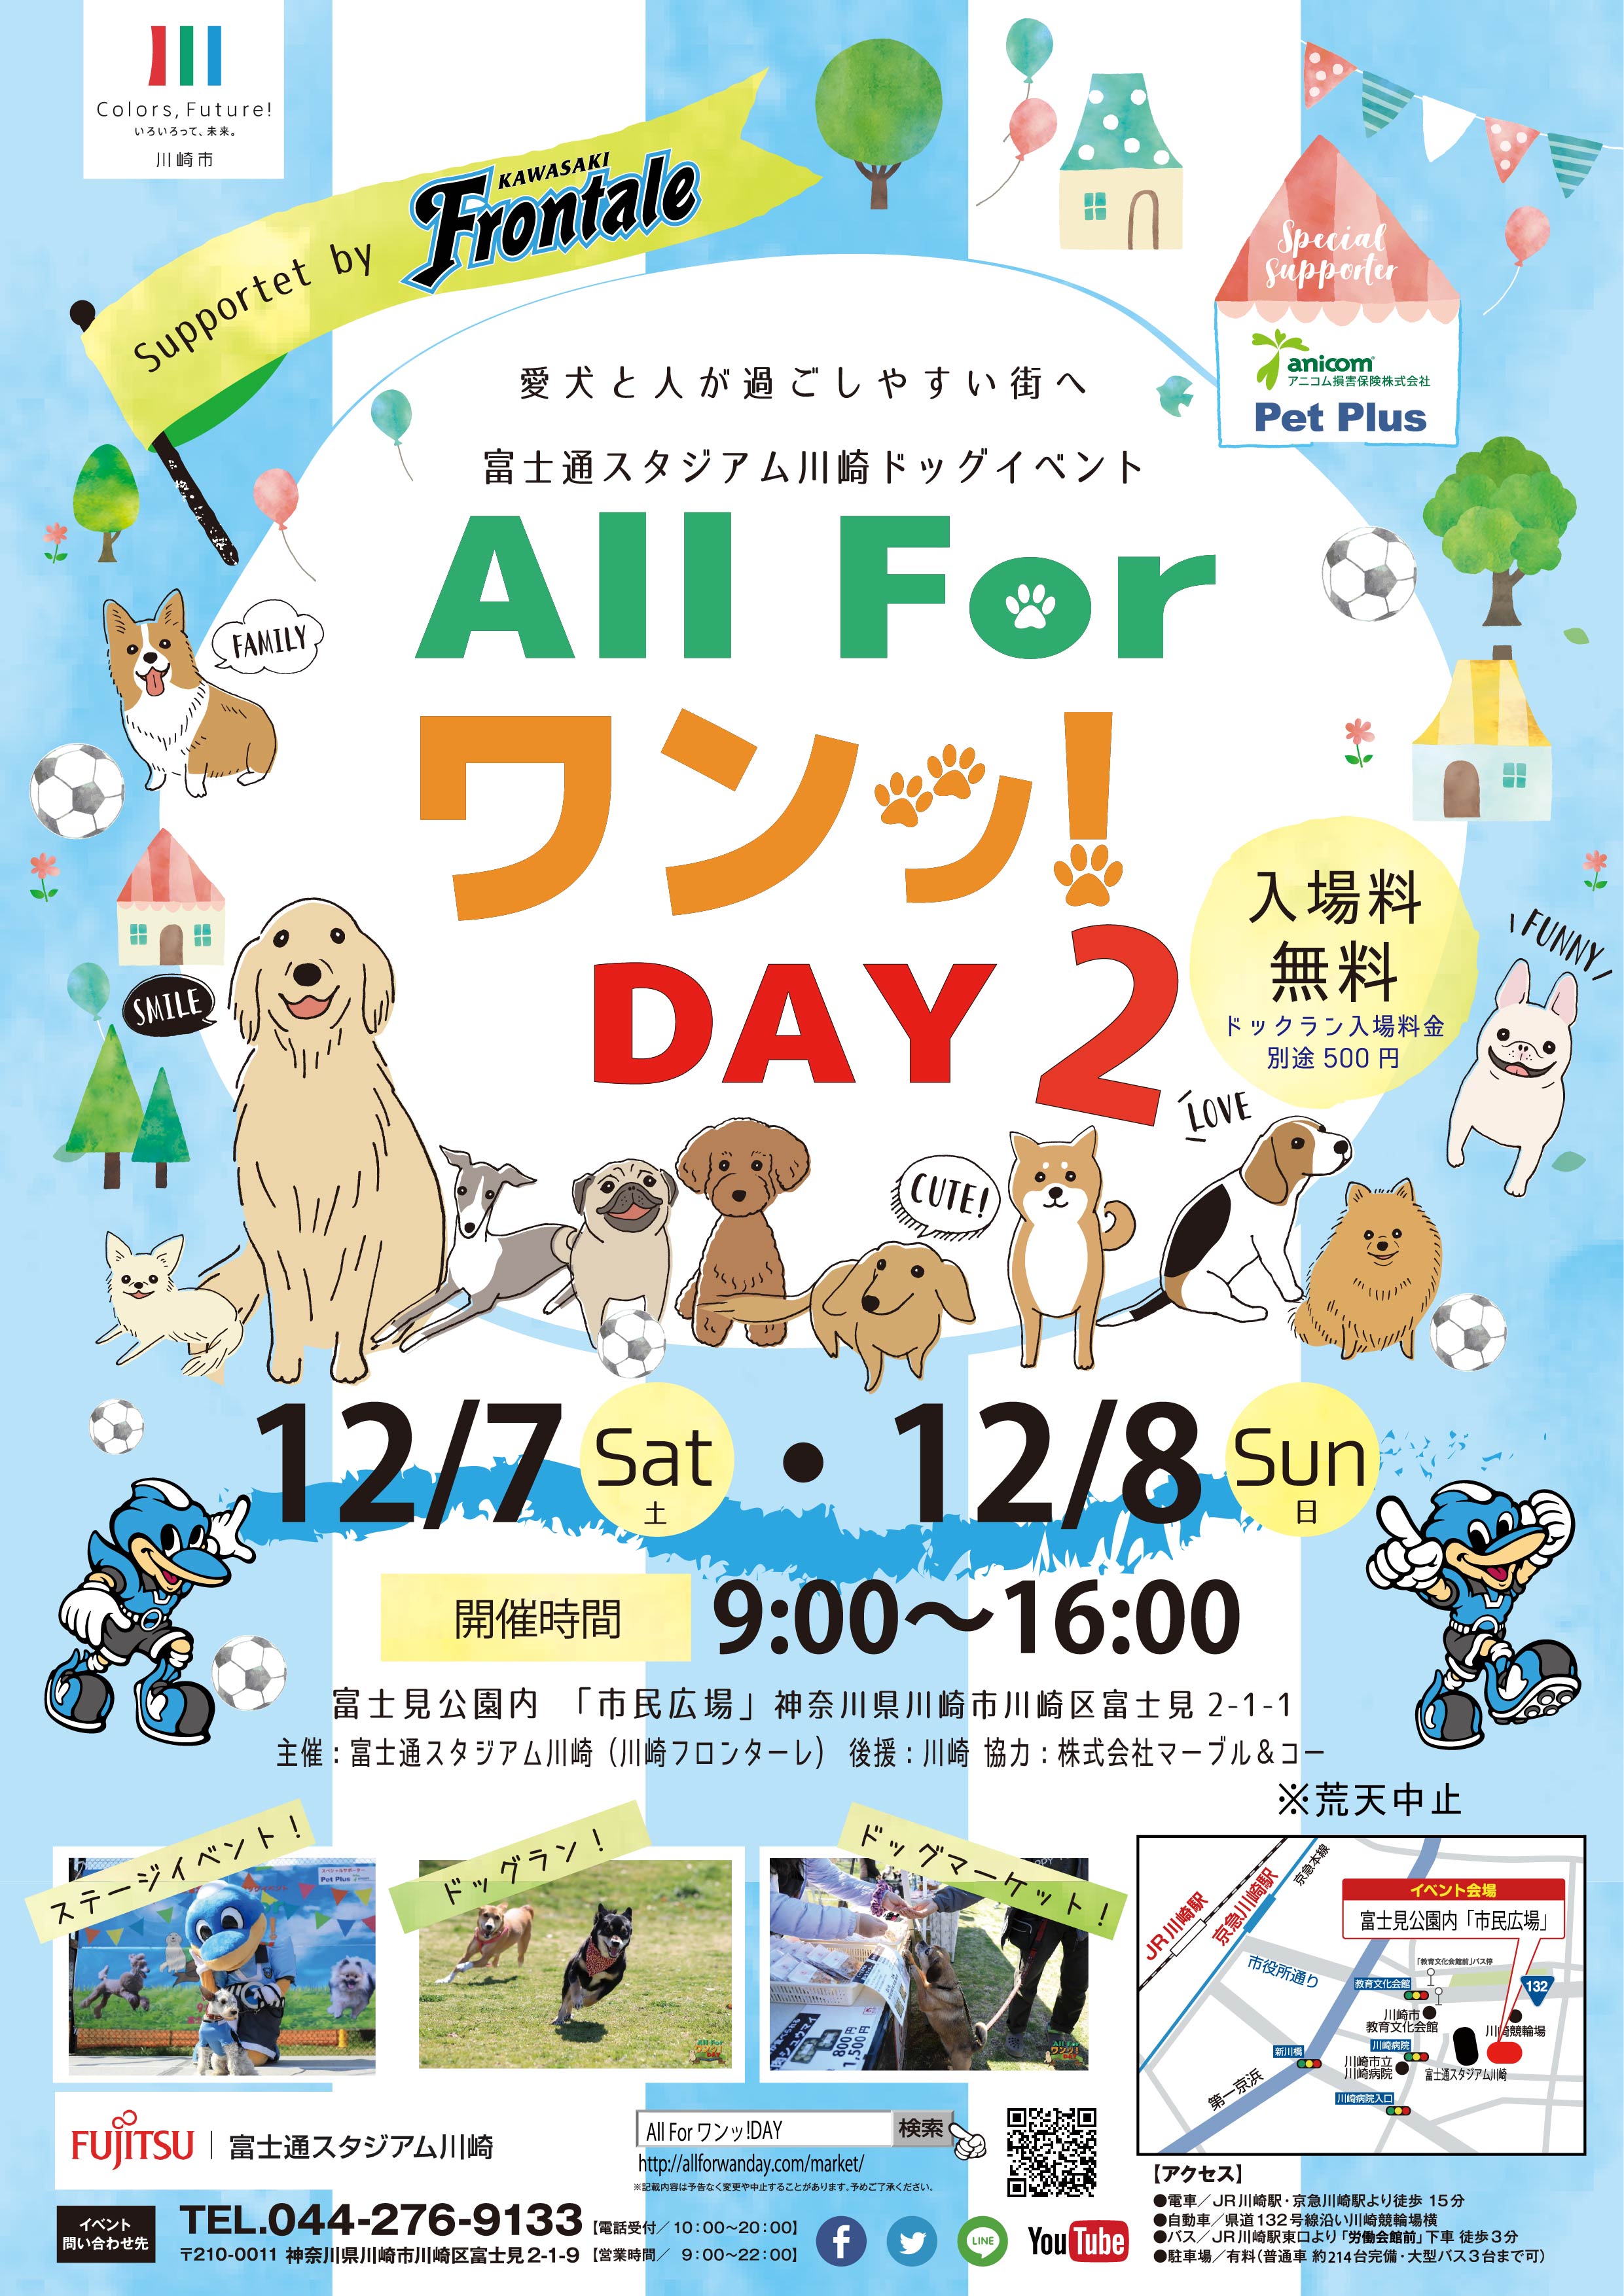 All Forワンッ!! DAY 2019 Supported by 川崎フロンターレ